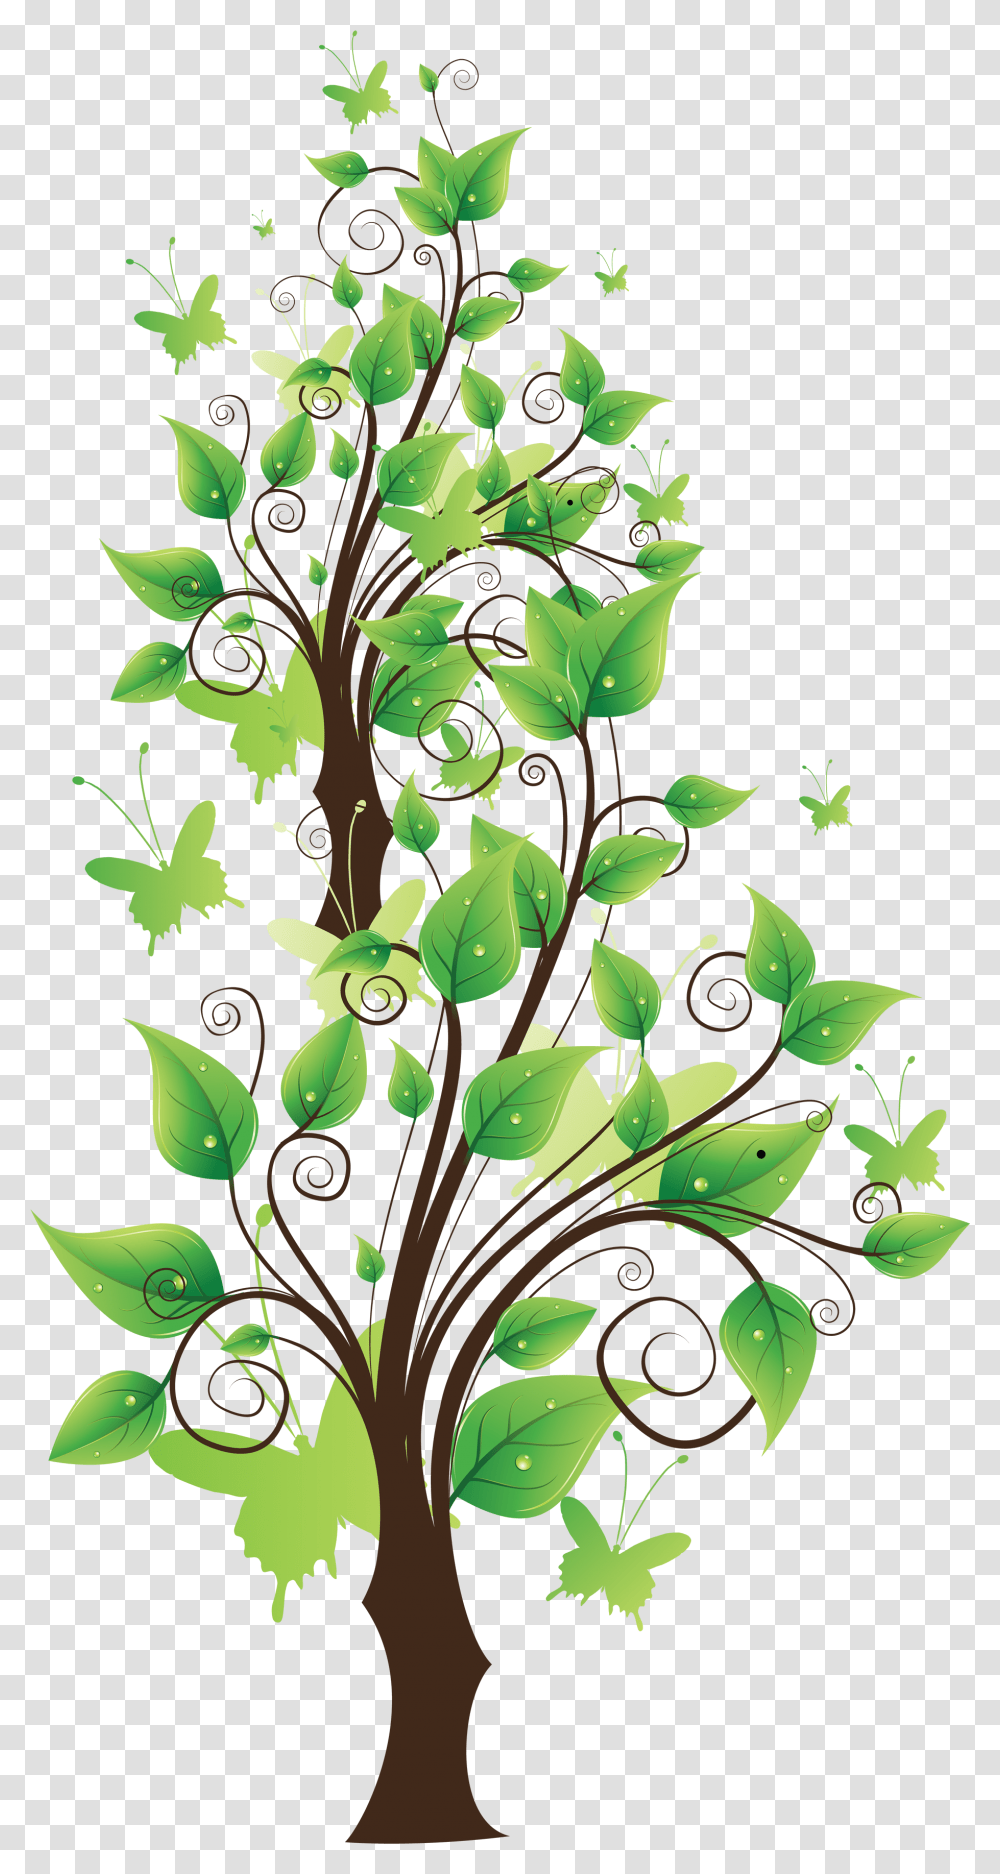 Tree Download Files Picsart Photo Studio For Pc Free Download, Leaf, Plant, Green, Flower Transparent Png